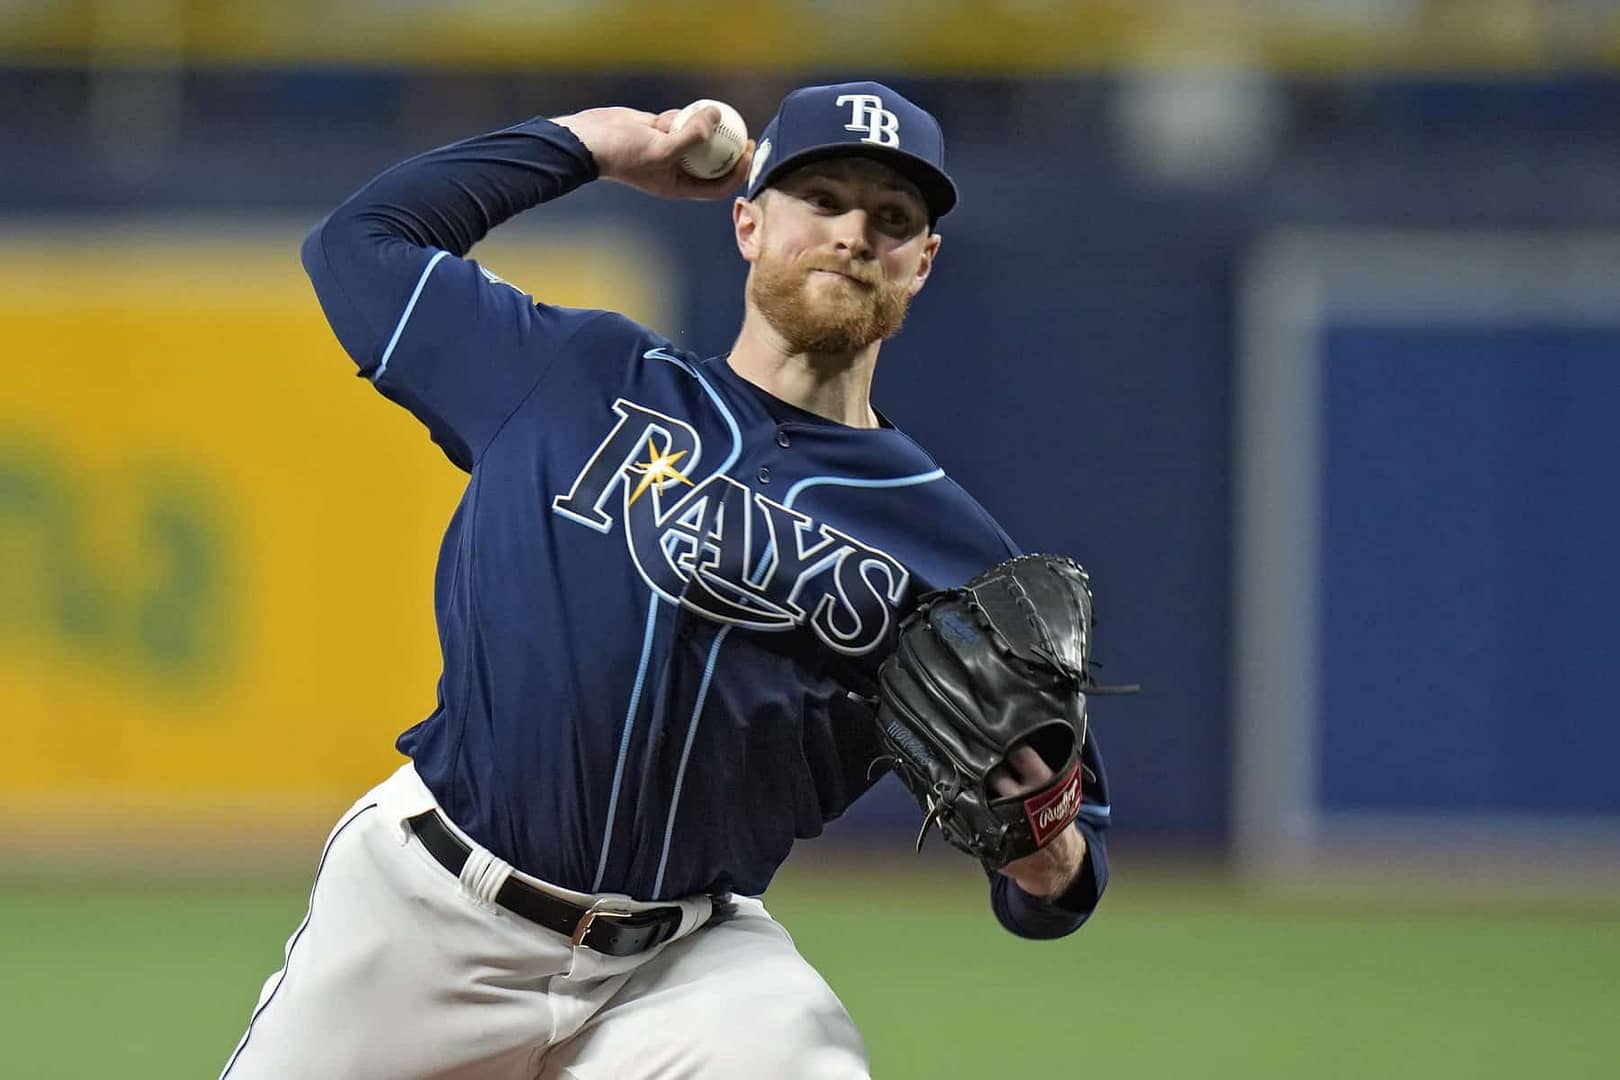 The latest Drew Rasmussen injury update brings attention to Rays right-hander Taj Bradley and his Rookie of the Year odds